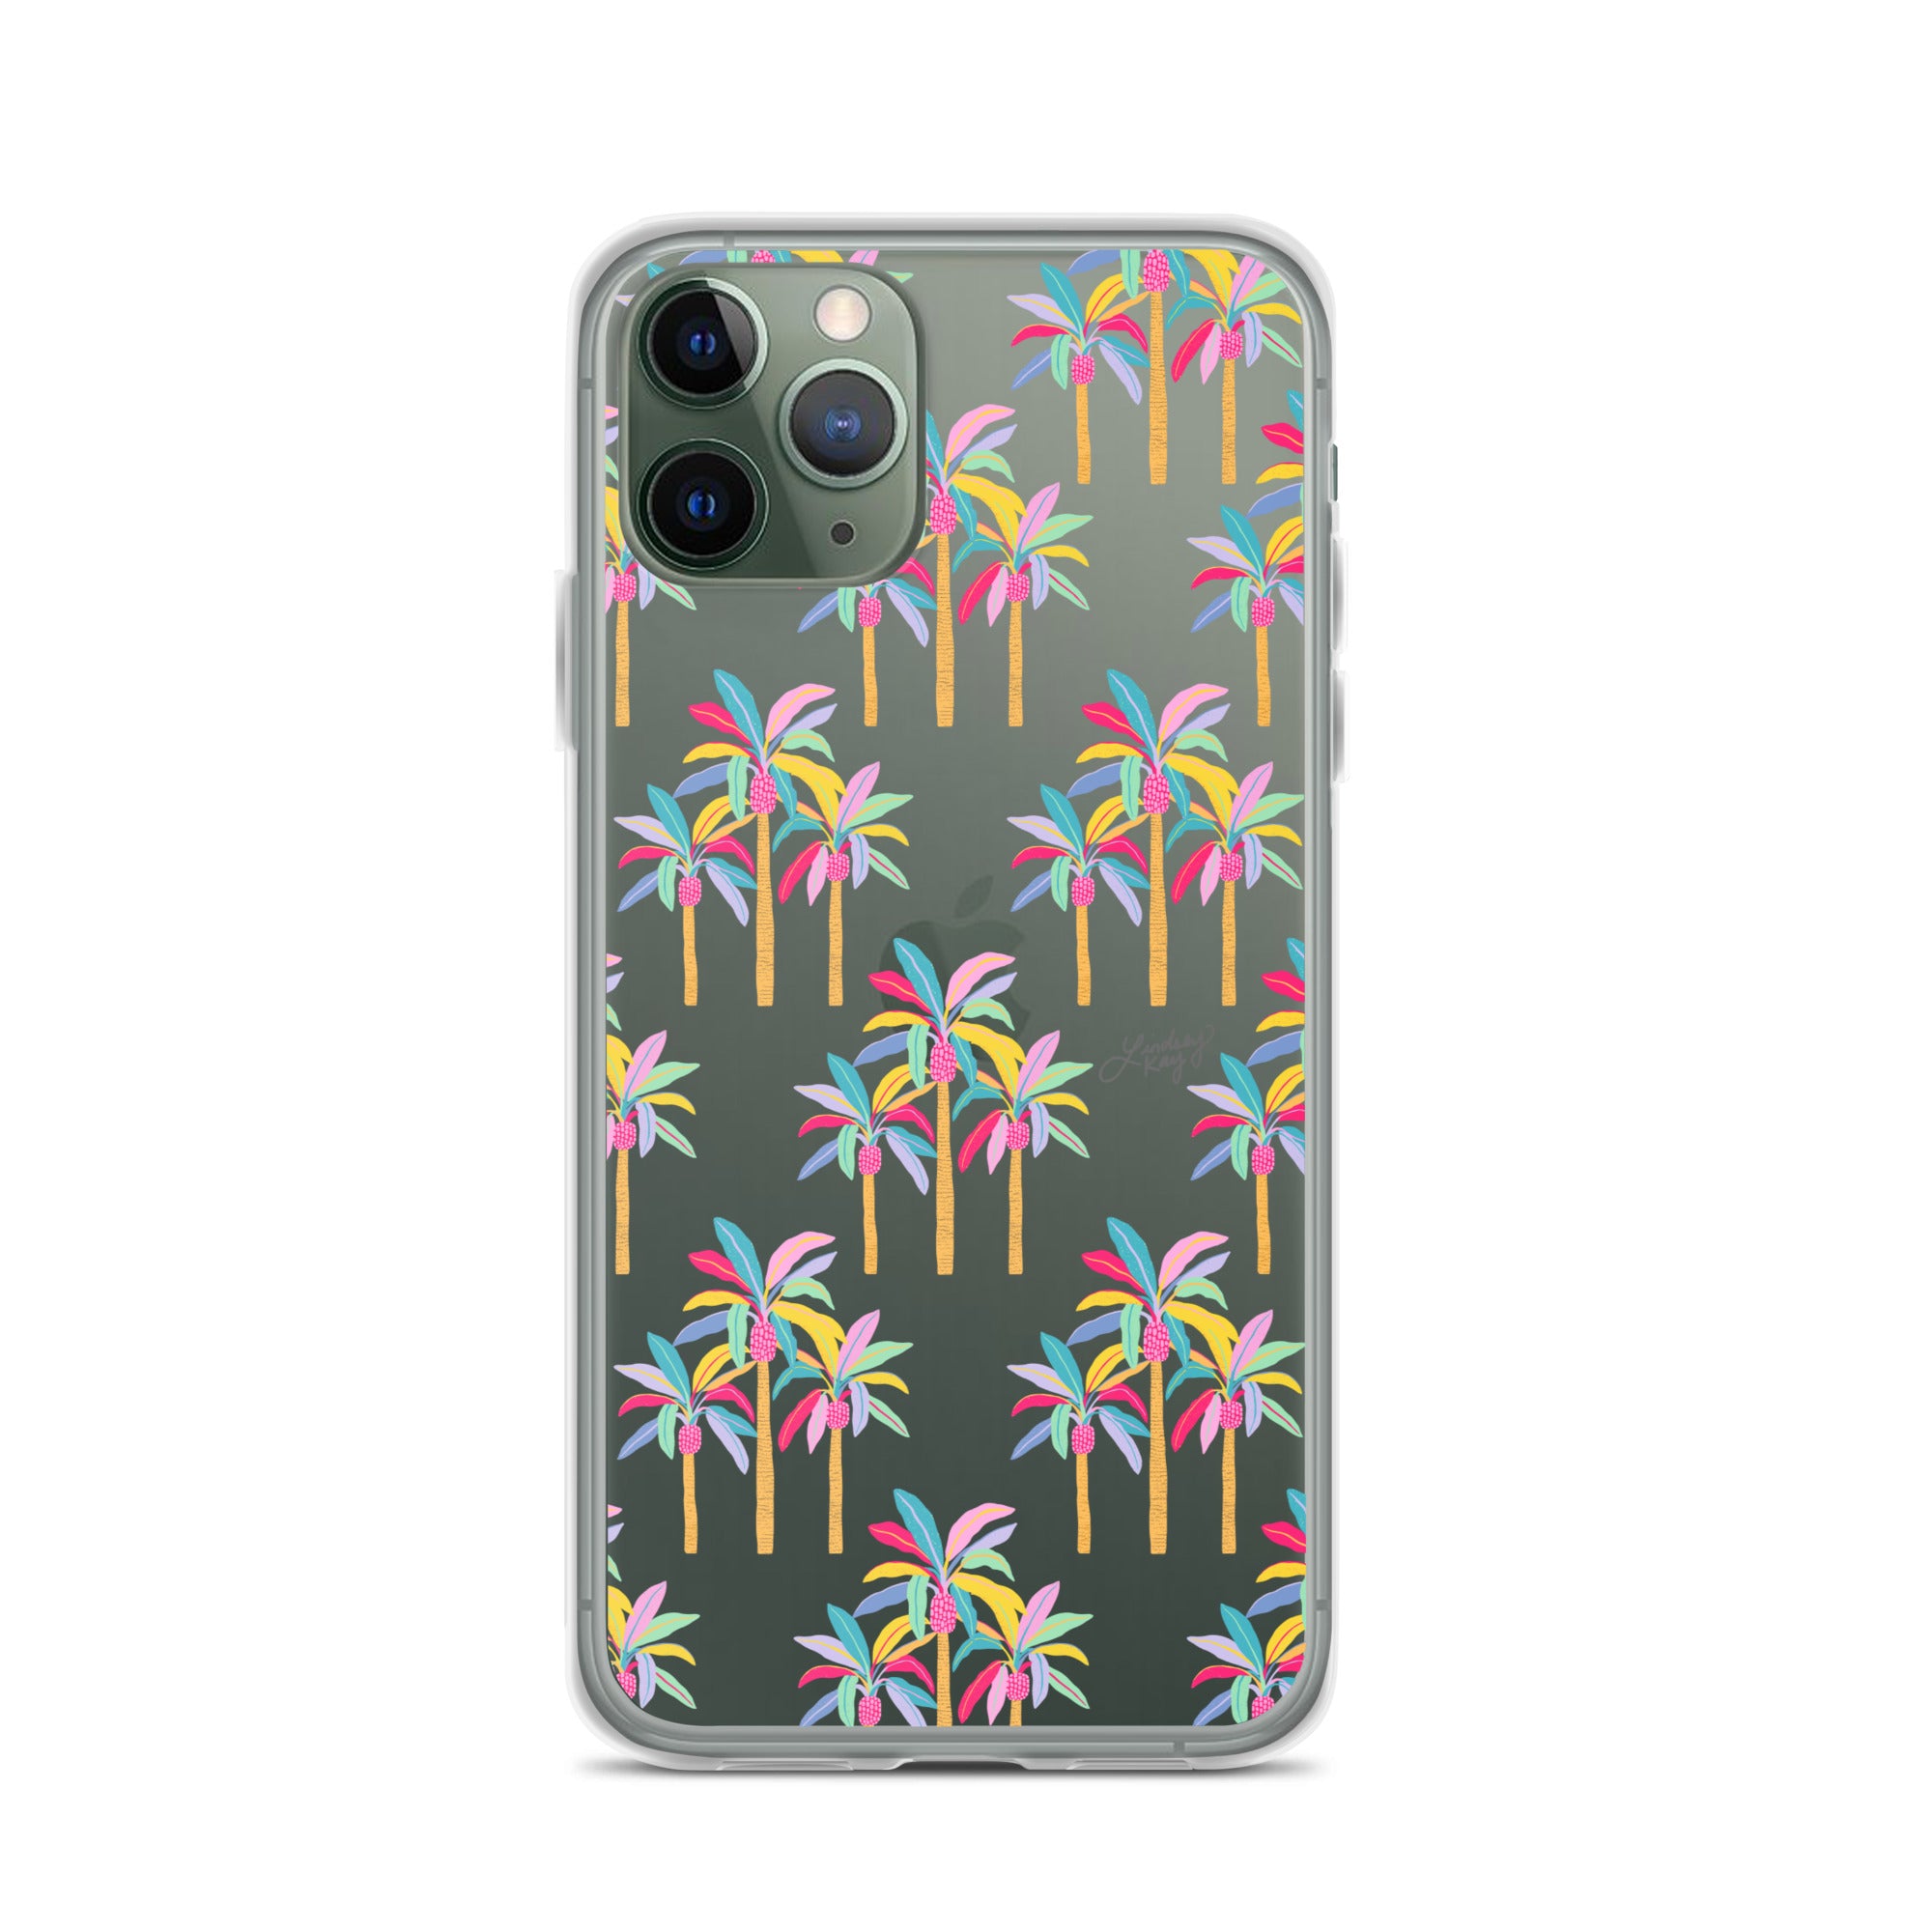 pastel palm tree illustration pattern design iphone case phone protector tropical cute colorful lindsey kay collective